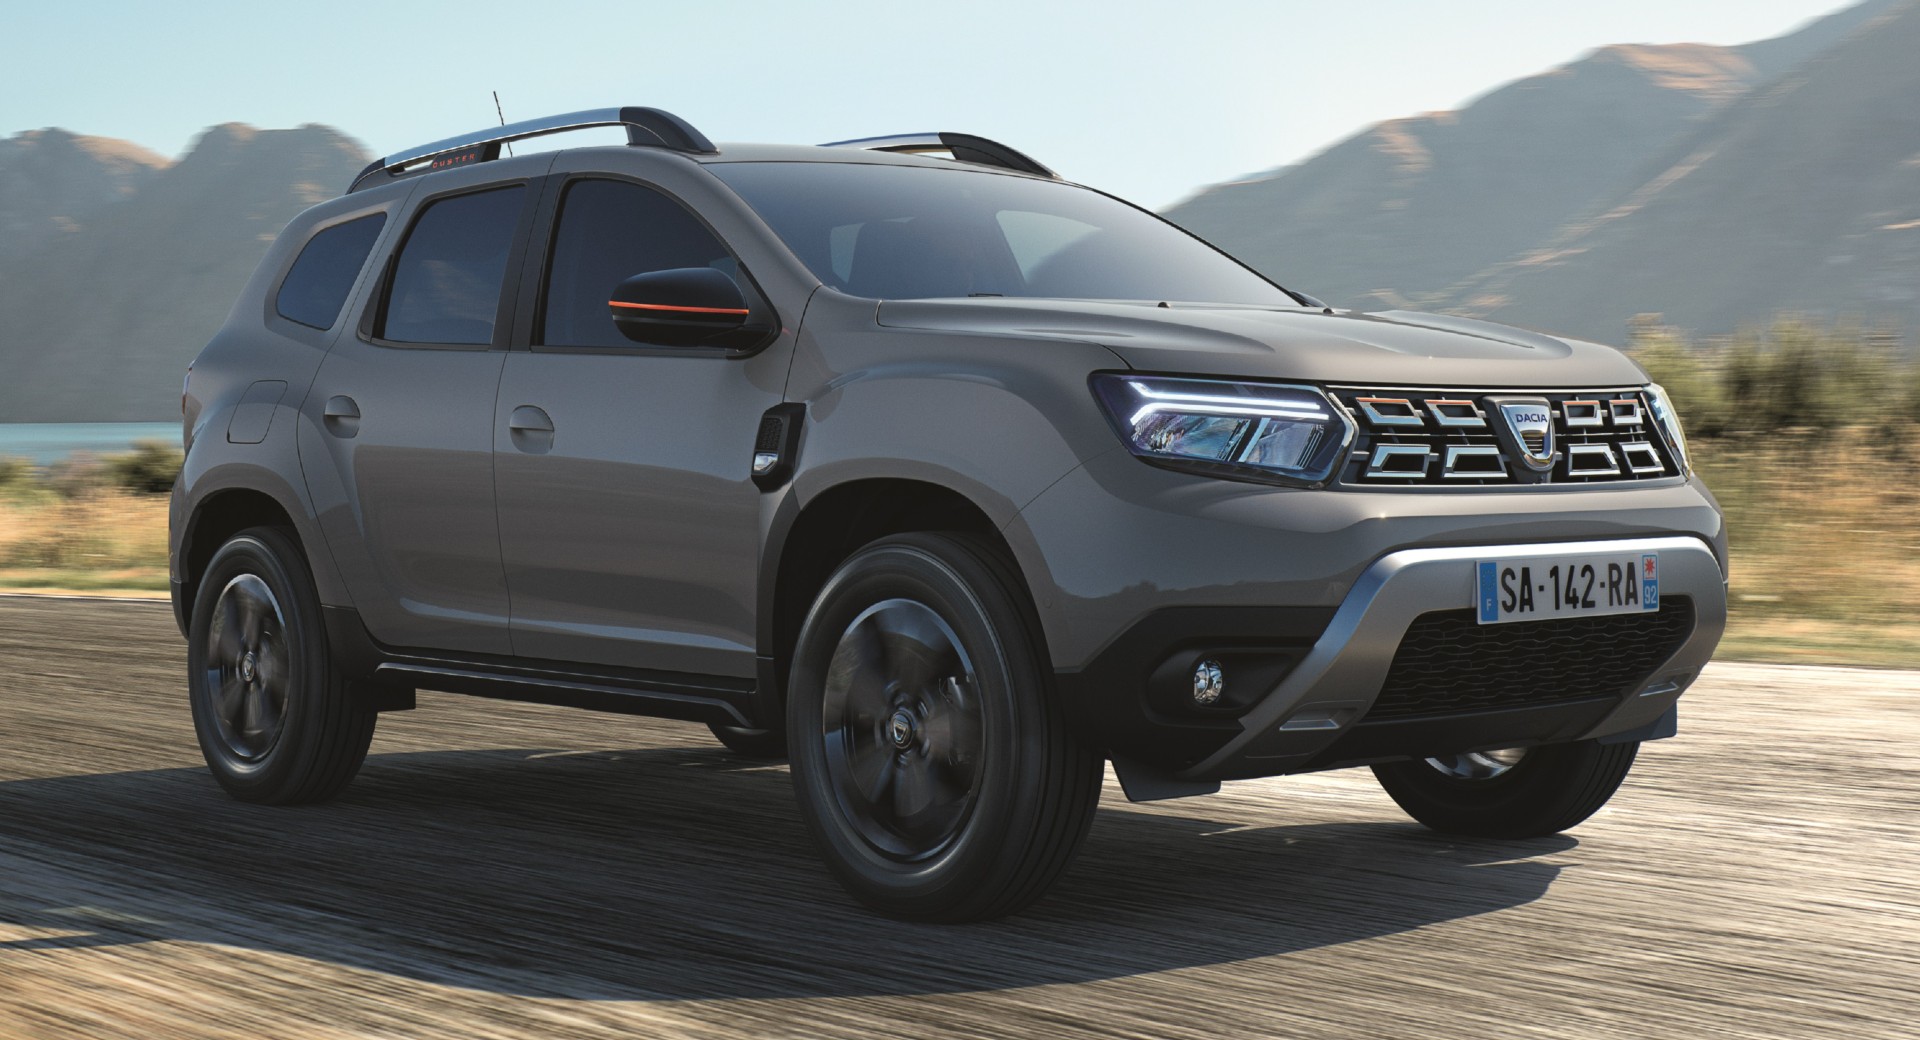 2022 Dacia Duster - Interior and Exterior Color Options 